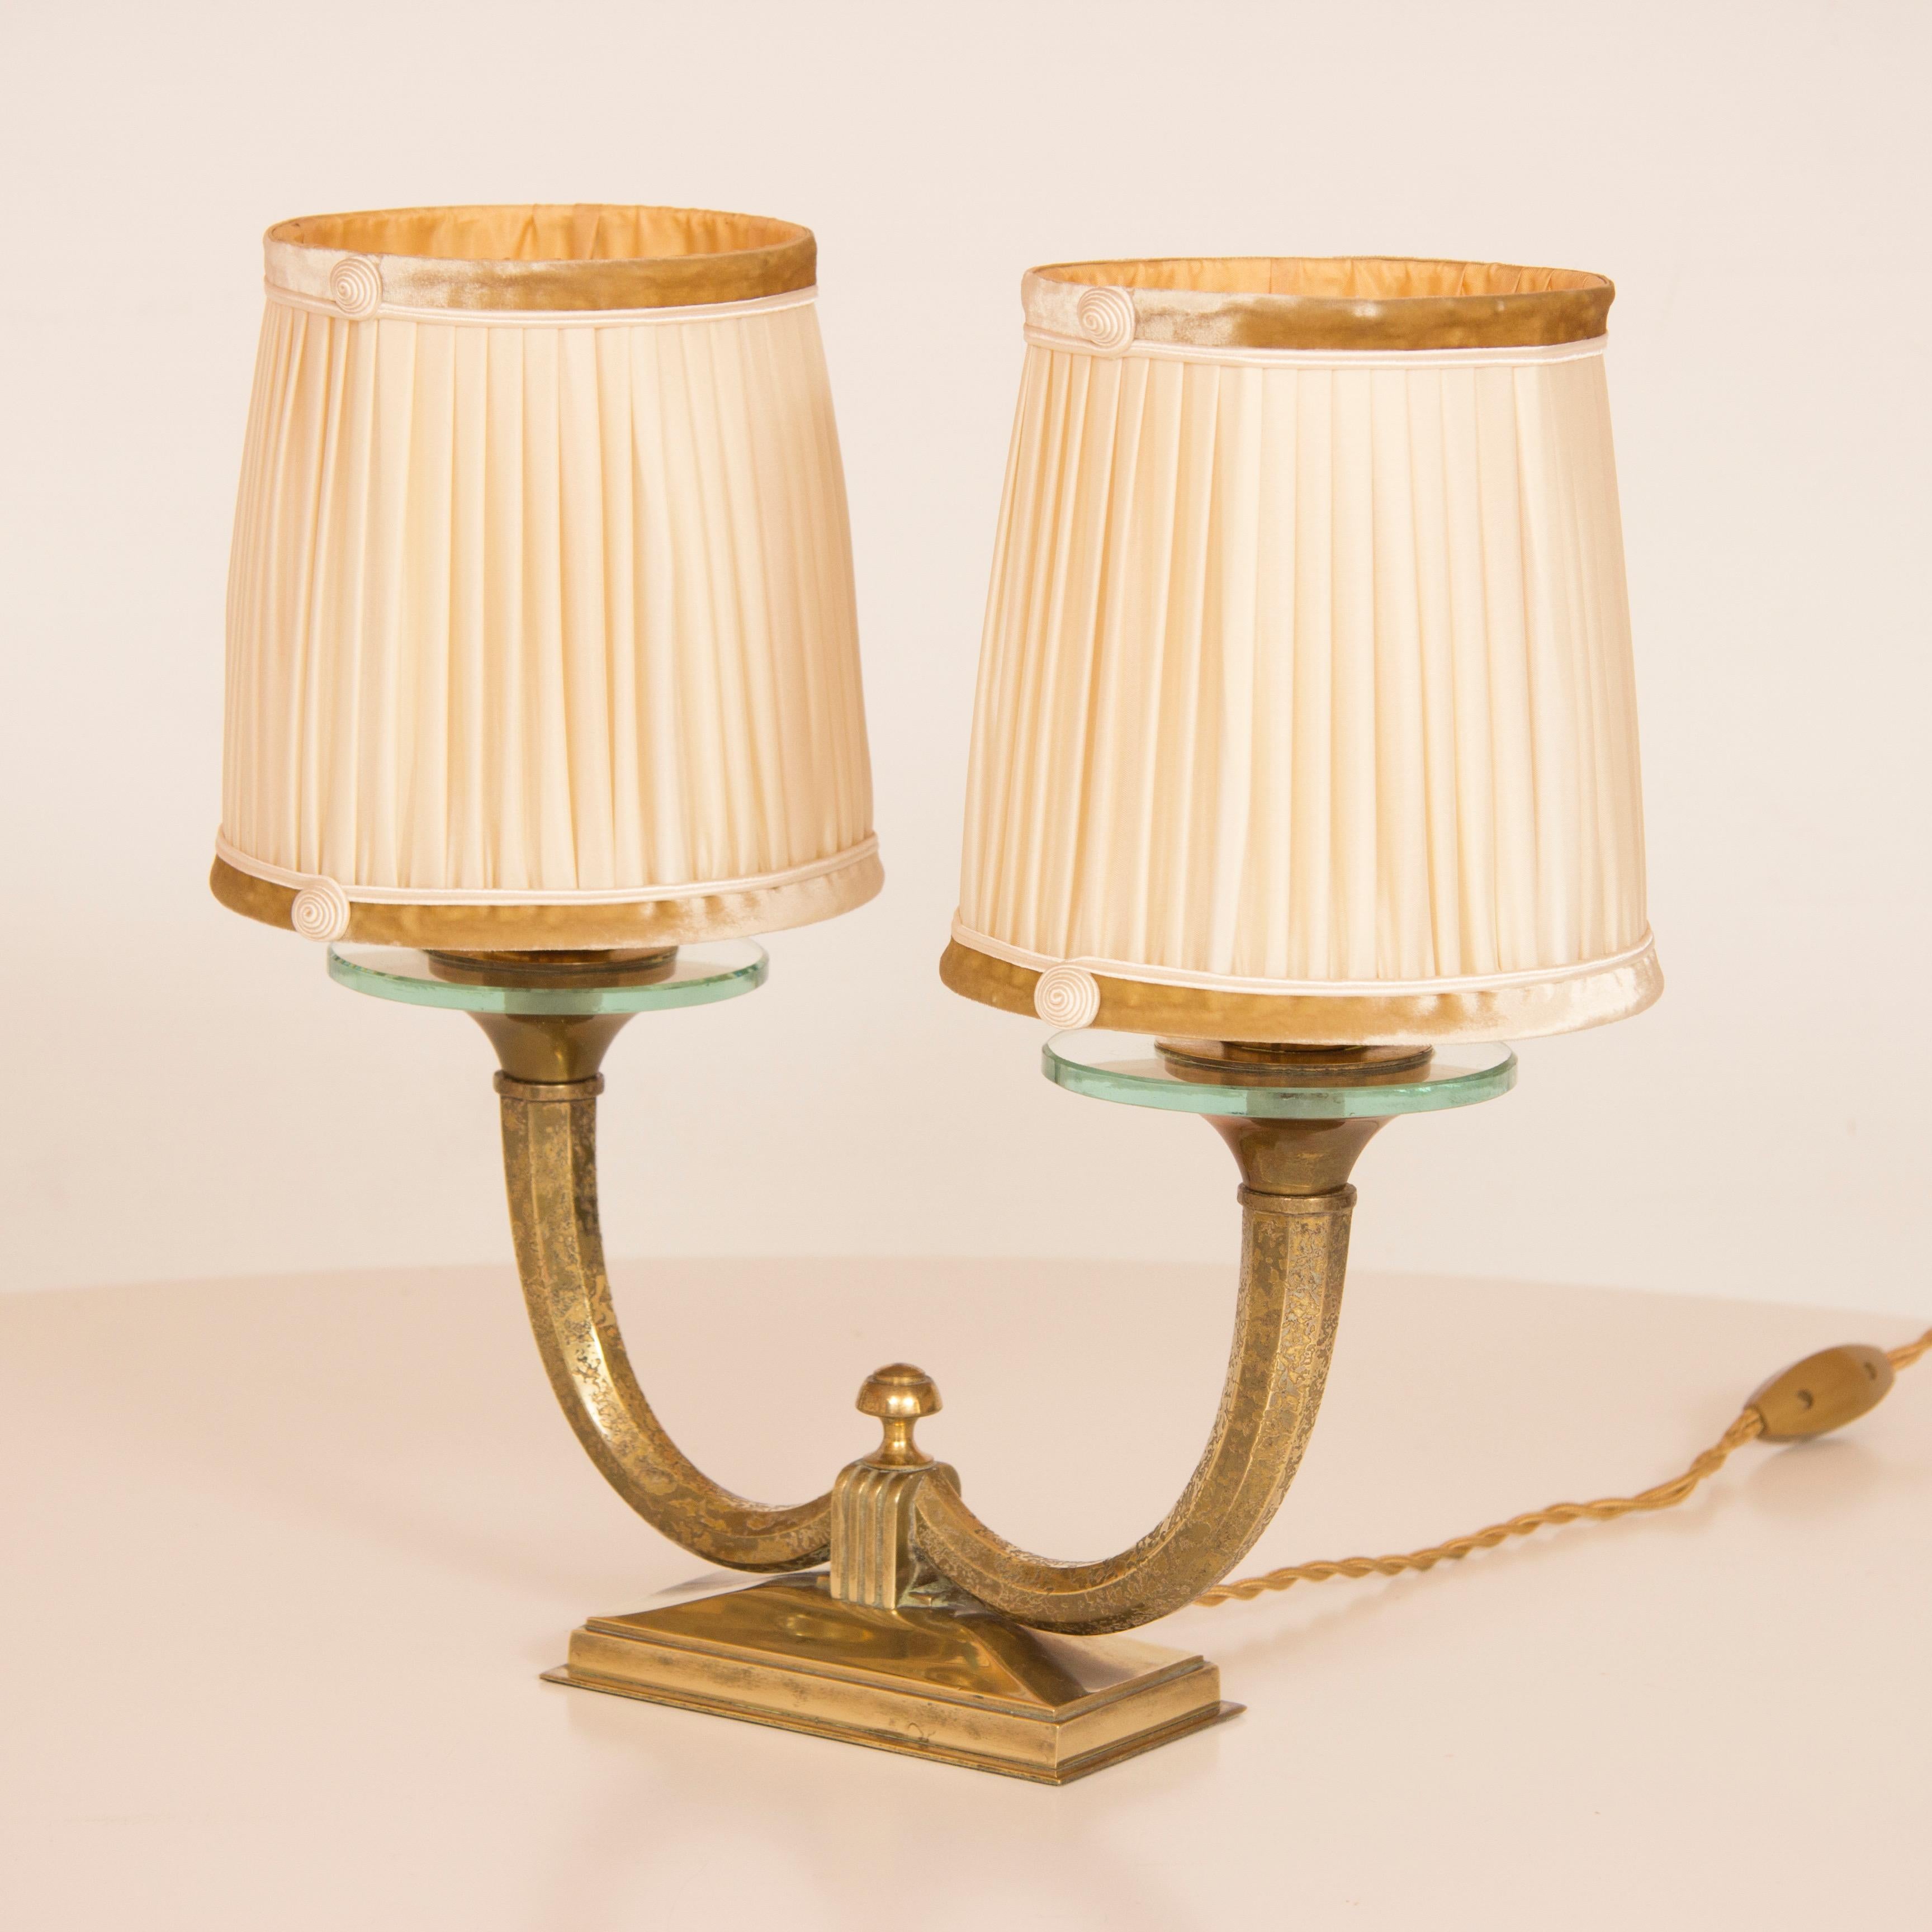 A fine pair of table lamps with original pleated silk shades trimmed with a button swirl on a crushed velvet band.
Gilt bronze base with acid flocked gilt bronze arms with thick glass disk below the shades.
both signed Genet and Michon at the wire